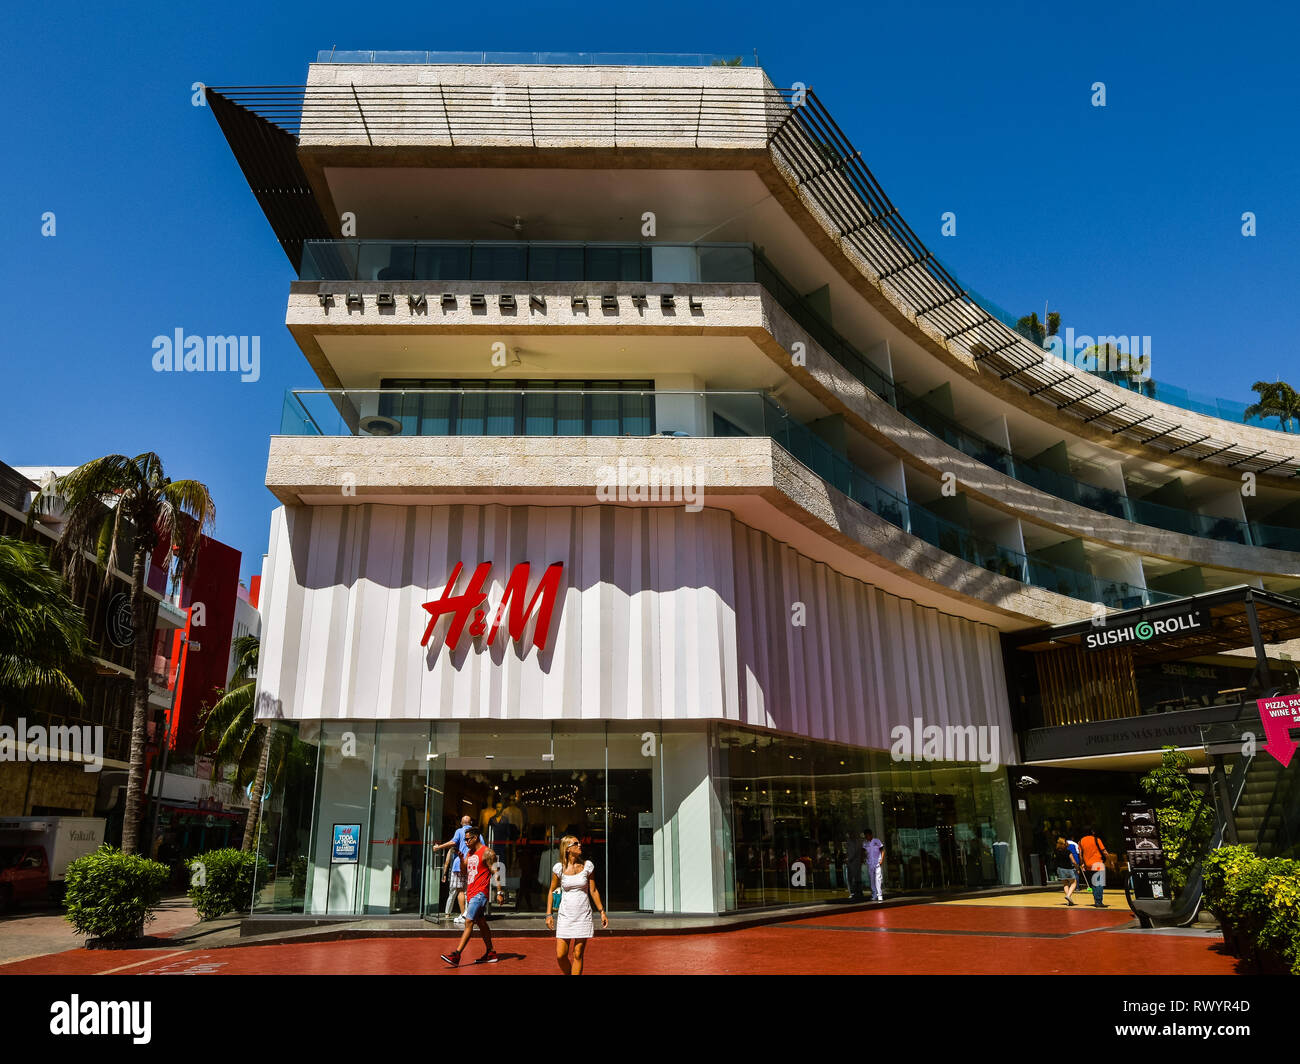 Playa del Carmen, Mexico - Feb. 26, 2019: H&M department store with  Thompson Hotel above it Stock Photo - Alamy